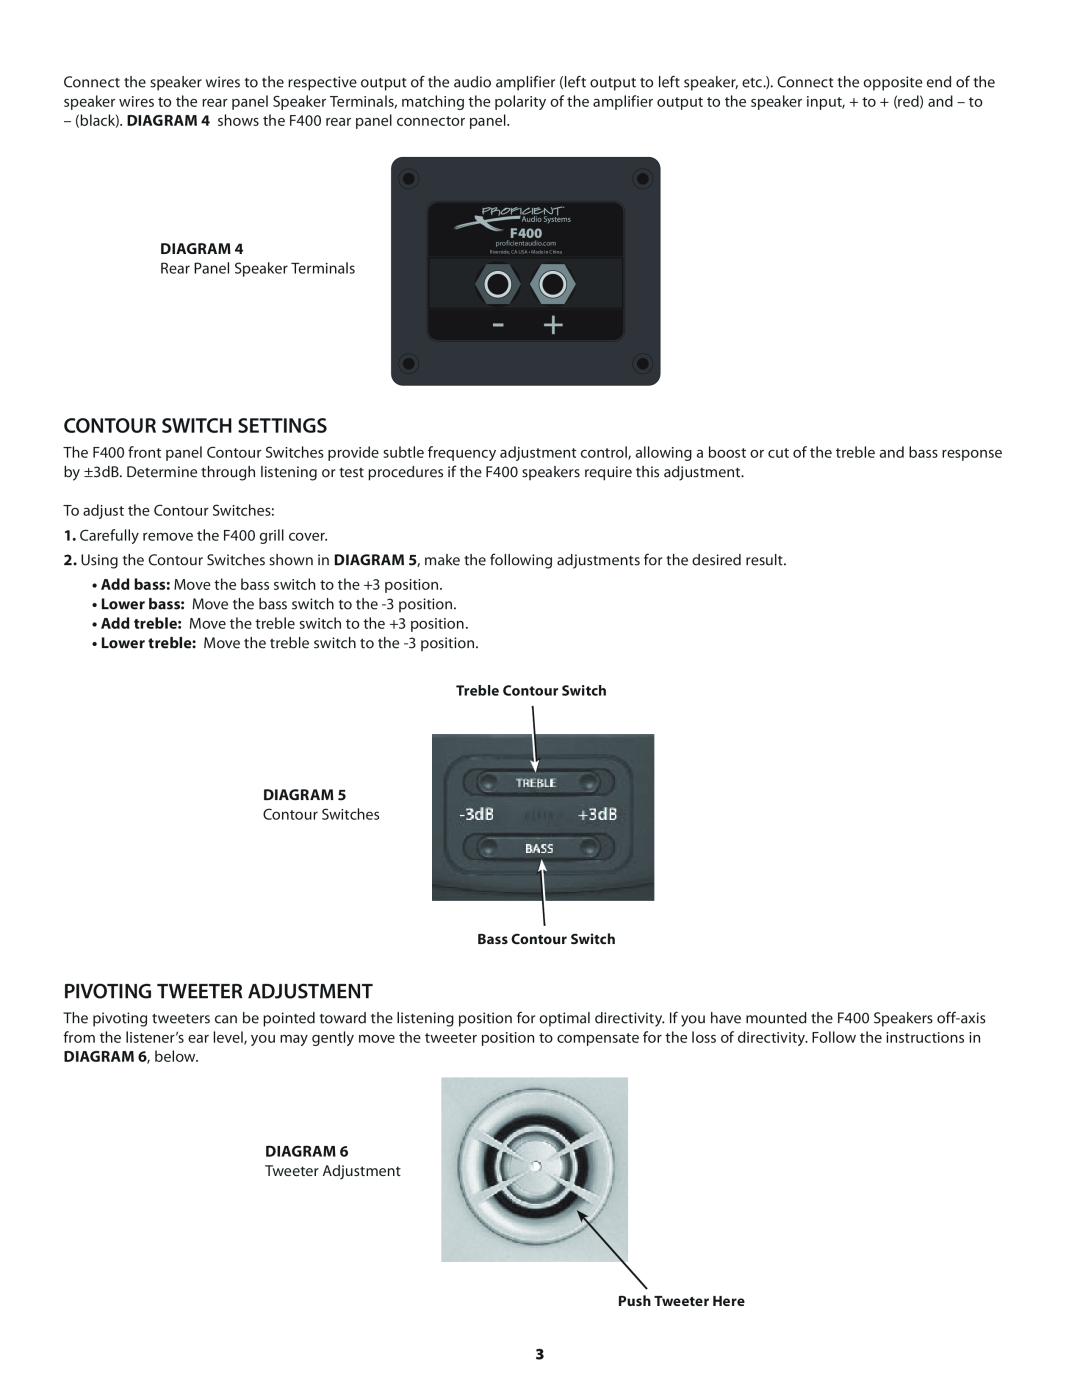 Proficient Audio Systems F400SLVR, F400BLK owner manual Contour Switch Settings, Pivoting Tweeter Adjustment, Diagram 